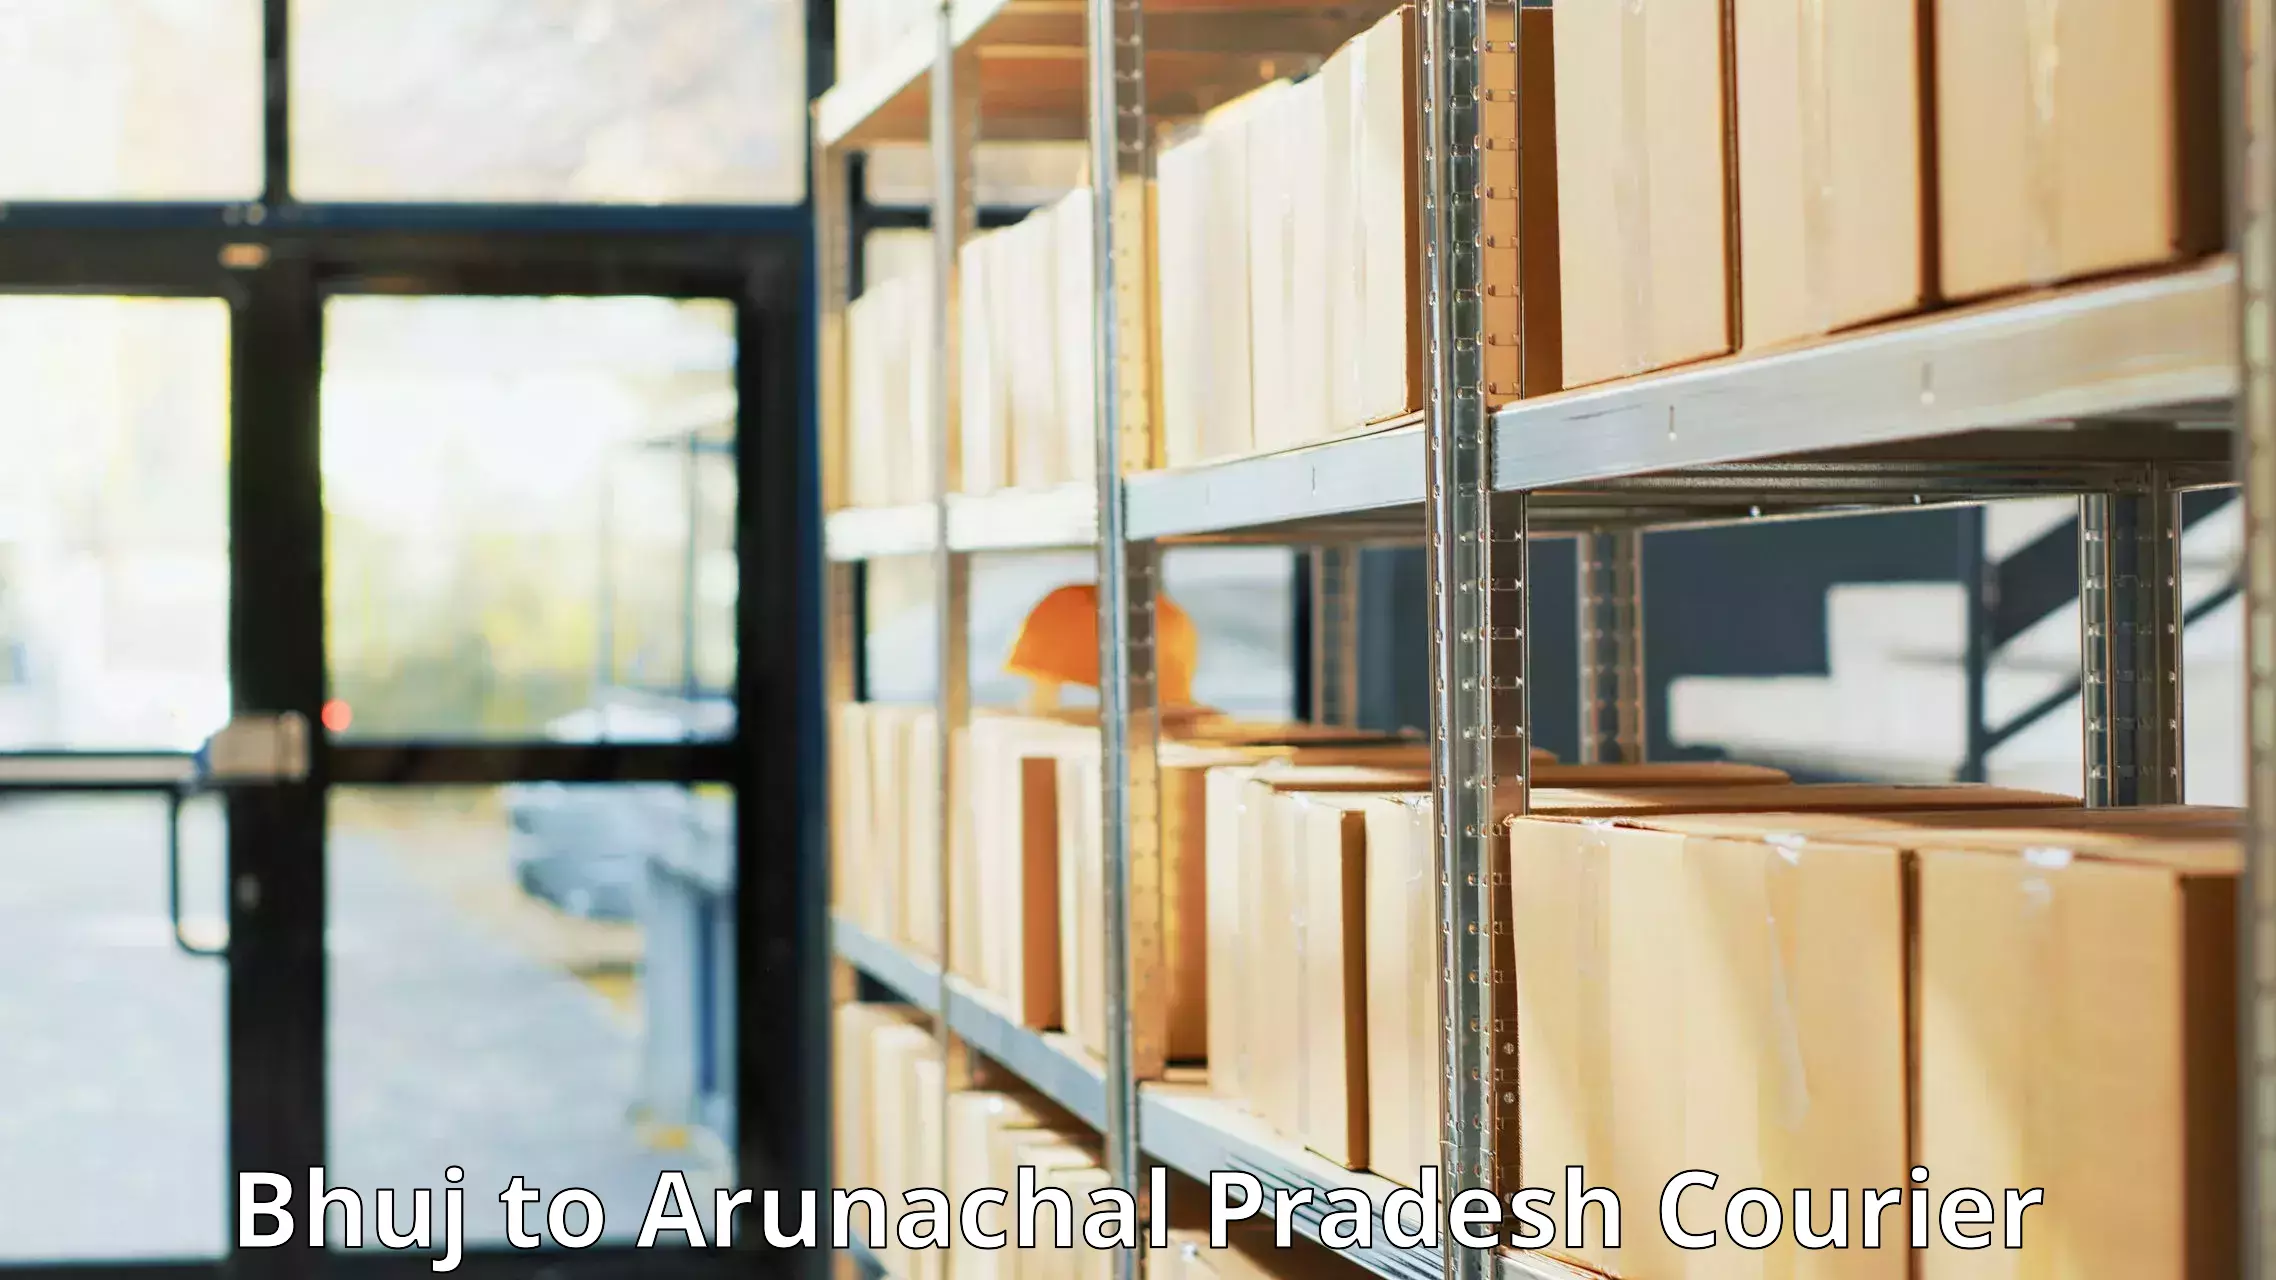 State-of-the-art courier technology Bhuj to Jairampur